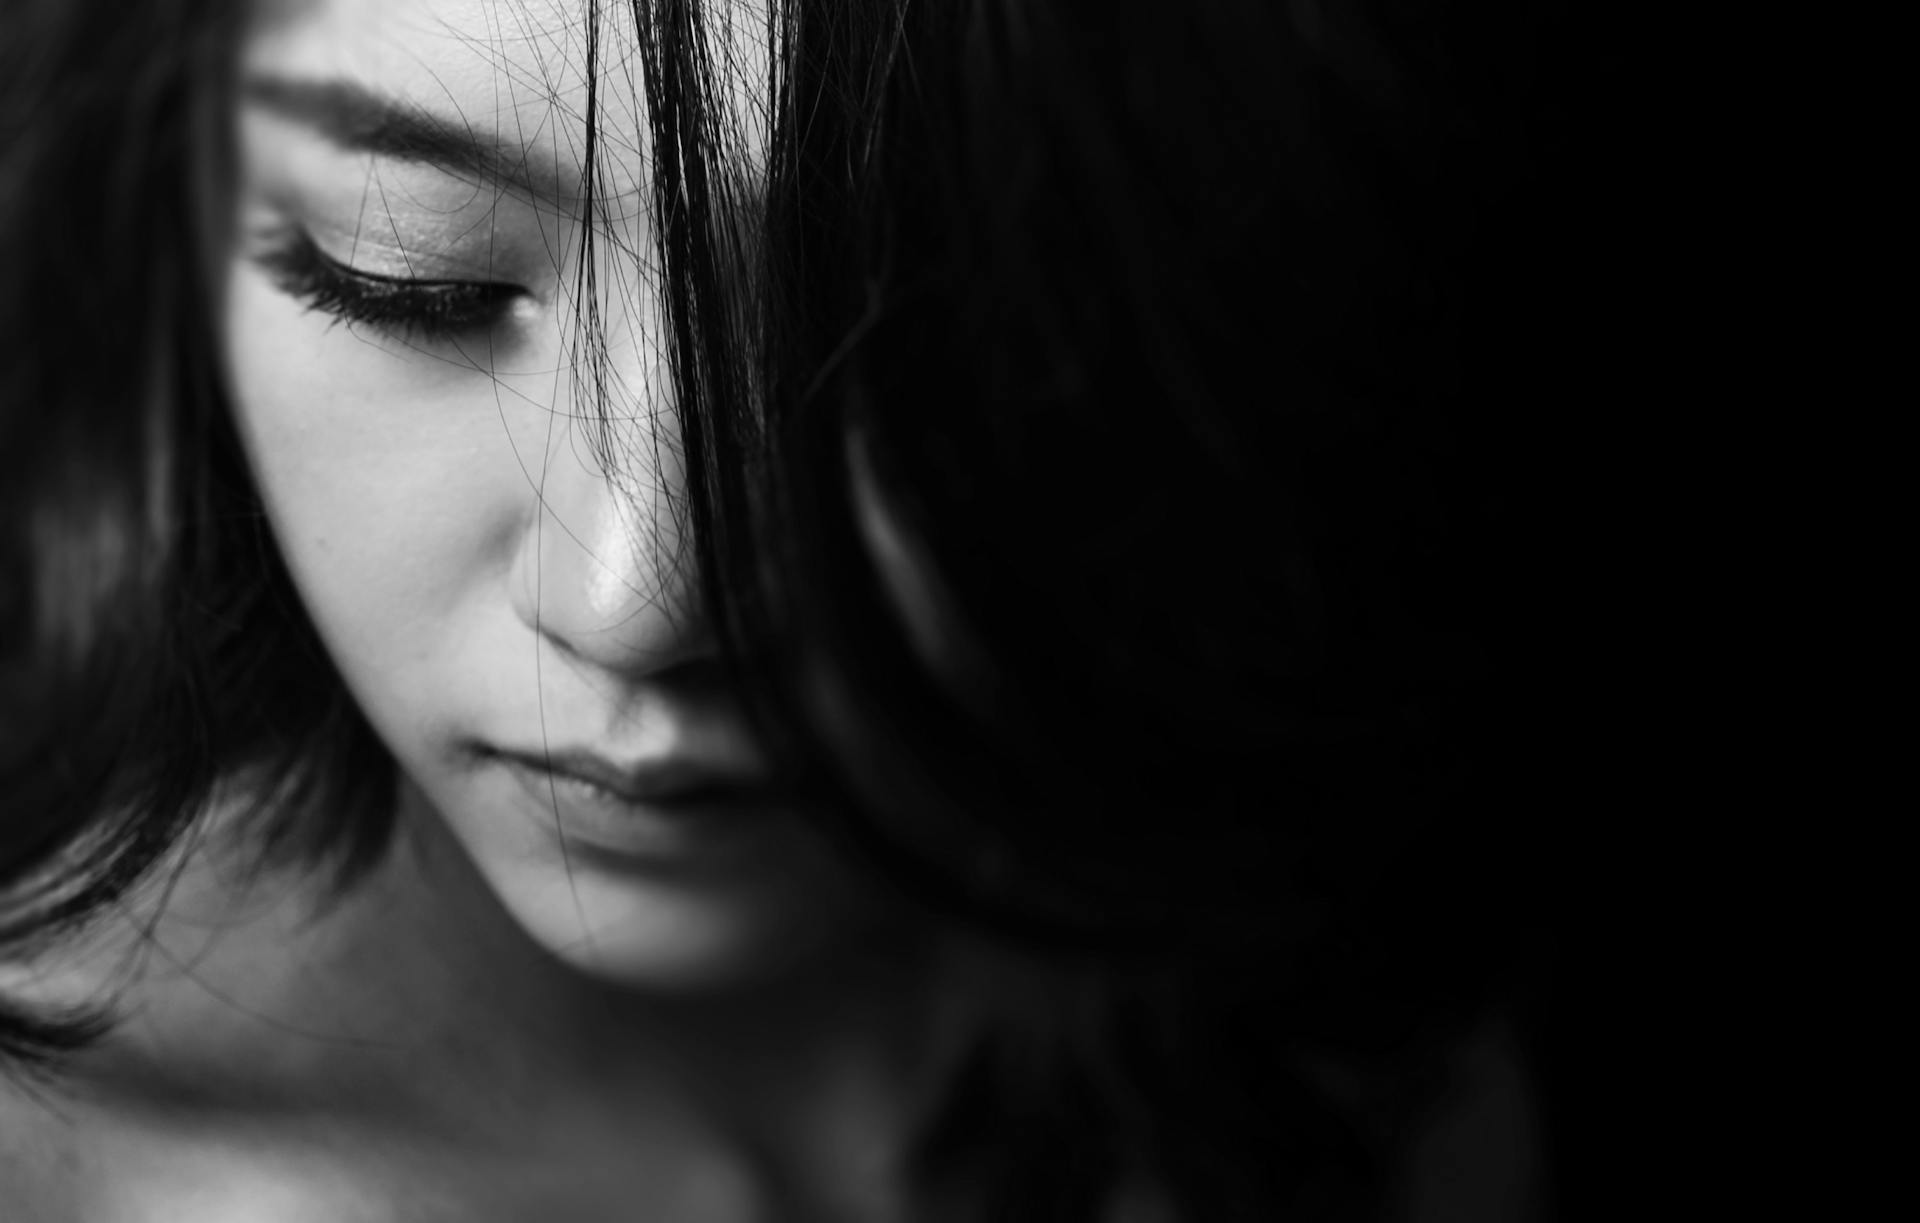 Thoughtful young woman | Source: Pexels